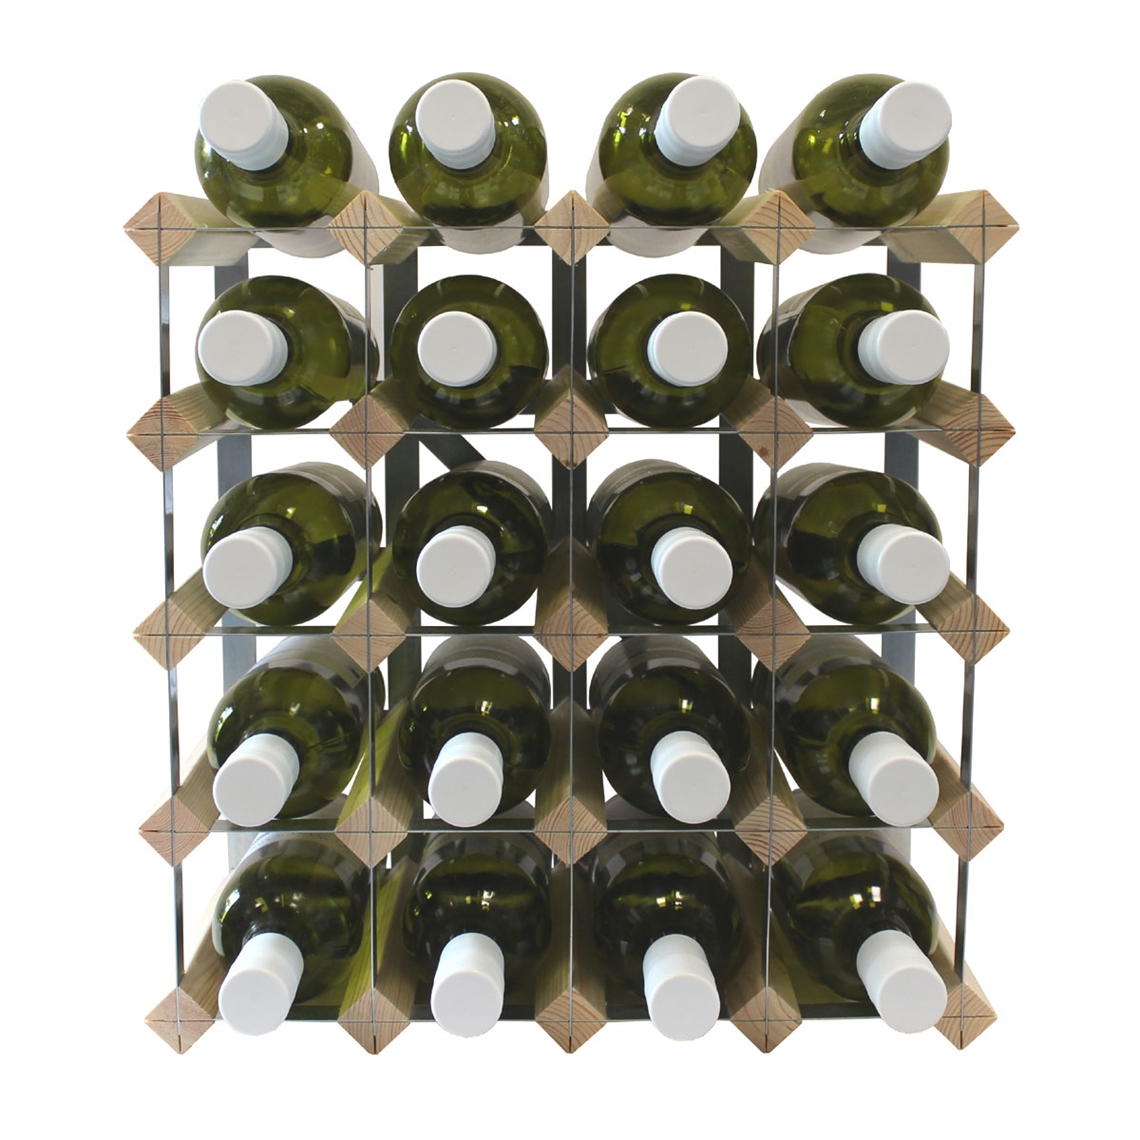 View more bespoke traditional wine racks from our Assembled Wine Racks range